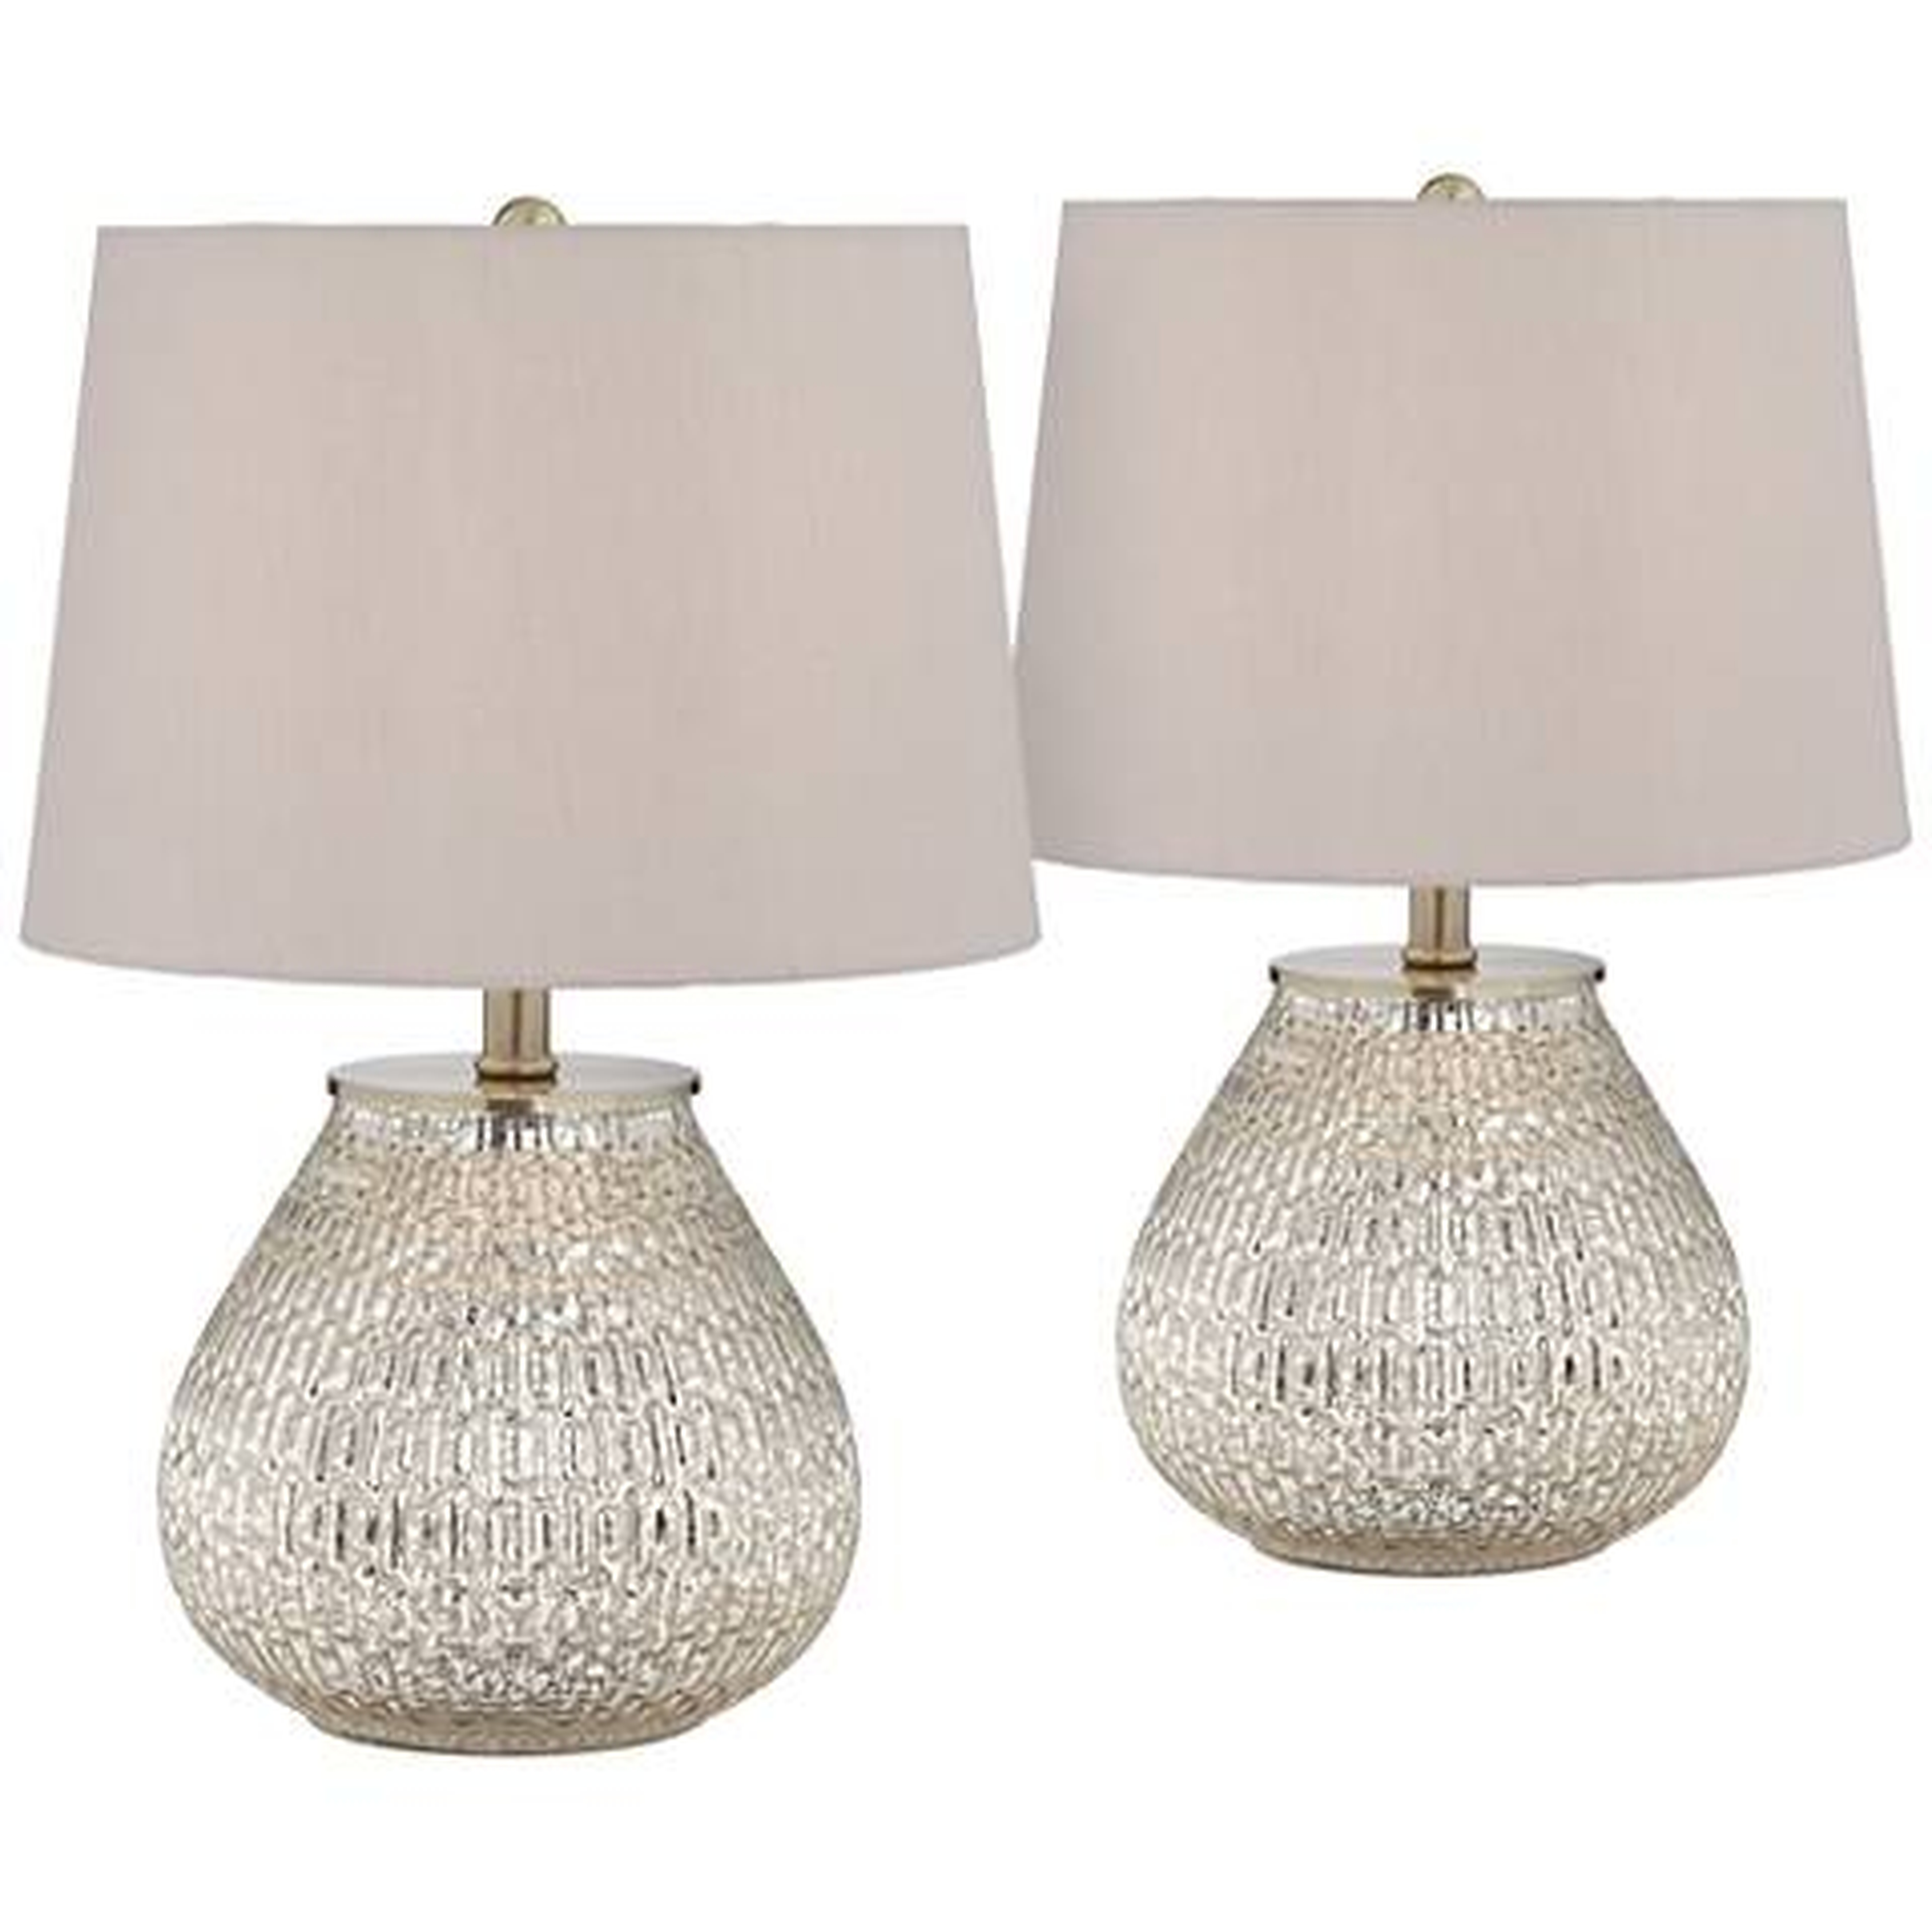 Zax 19 1/2" High Mercury Glass Accent Table Lamp Set of 2 - Lamps Plus